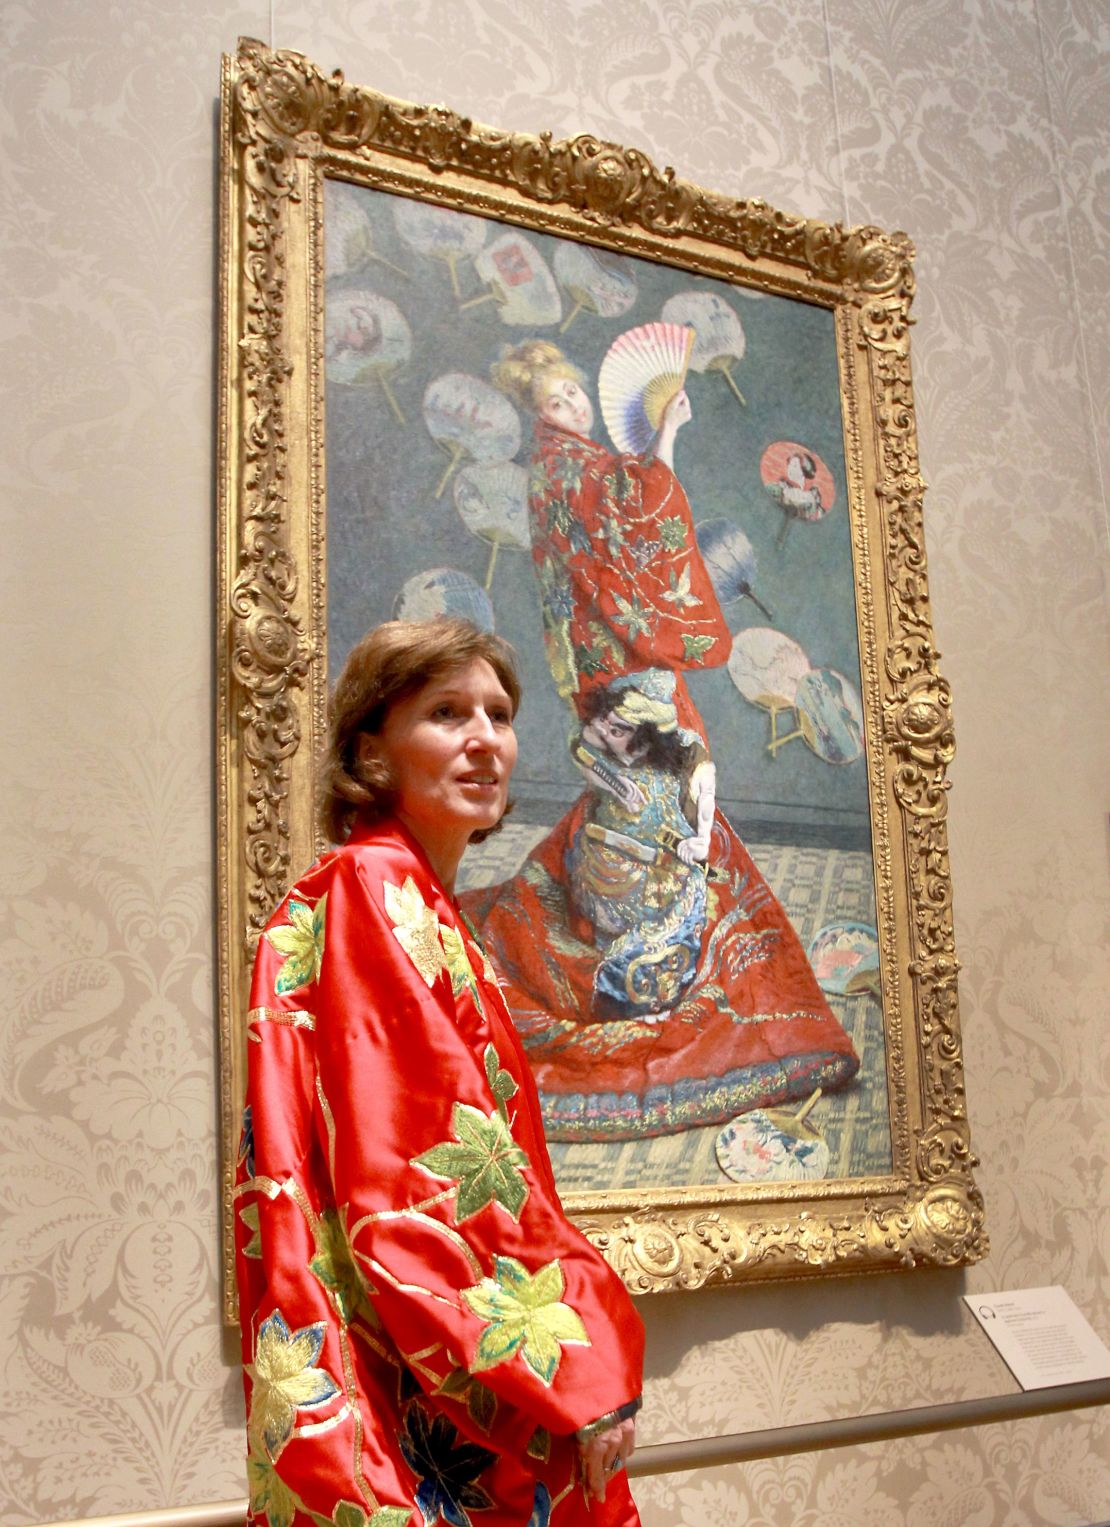 A museum visitor wears a museum-provided kimono in front of Claude Monet's "La Japonaise" at the Boston Museum of Fine Art in 2015.